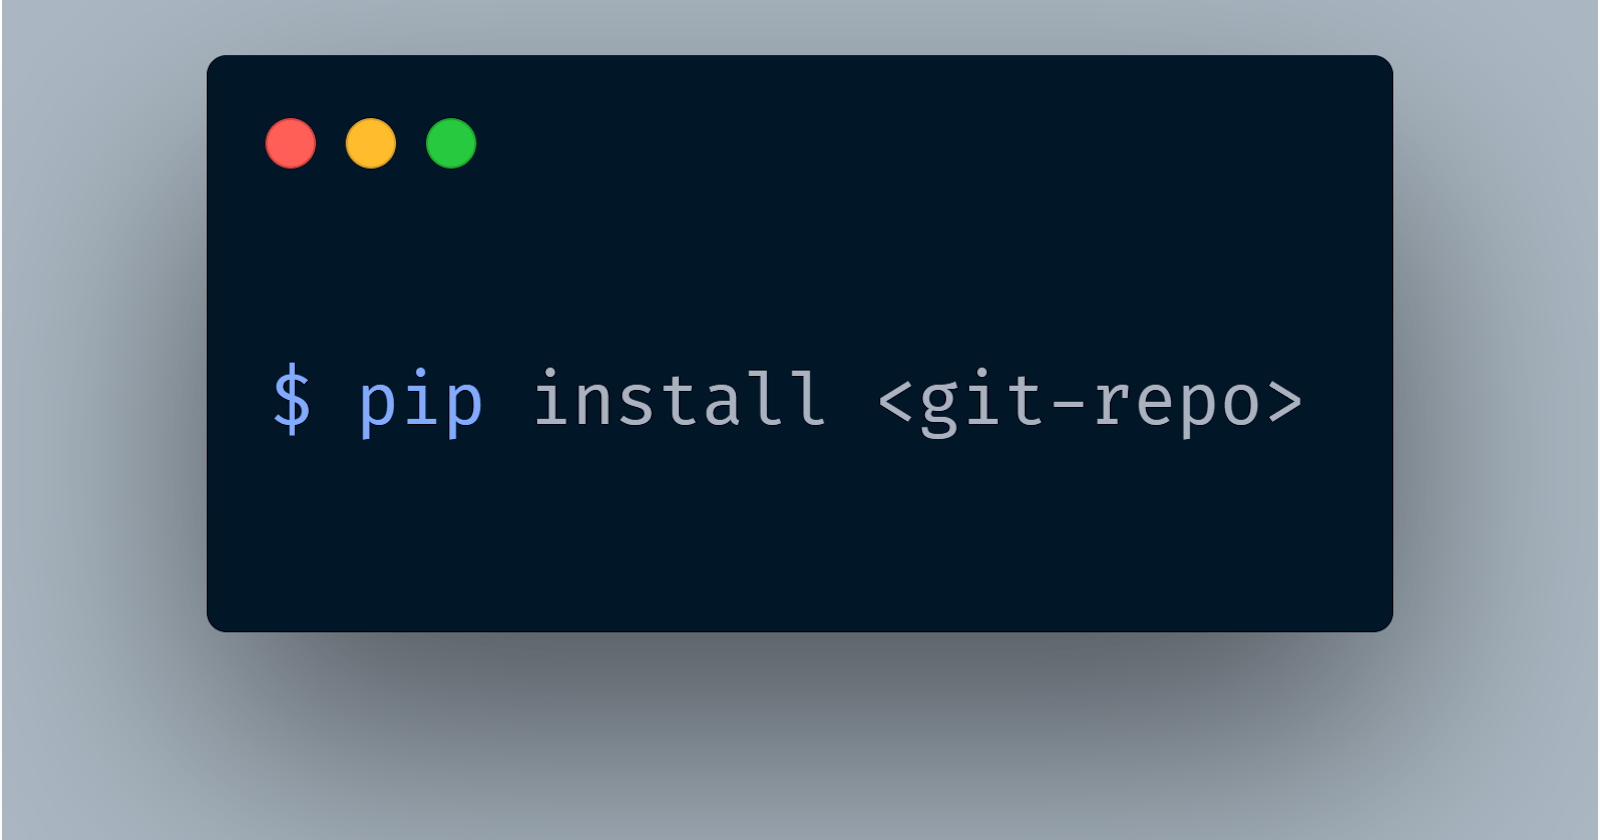 Pip Install a Git Repository